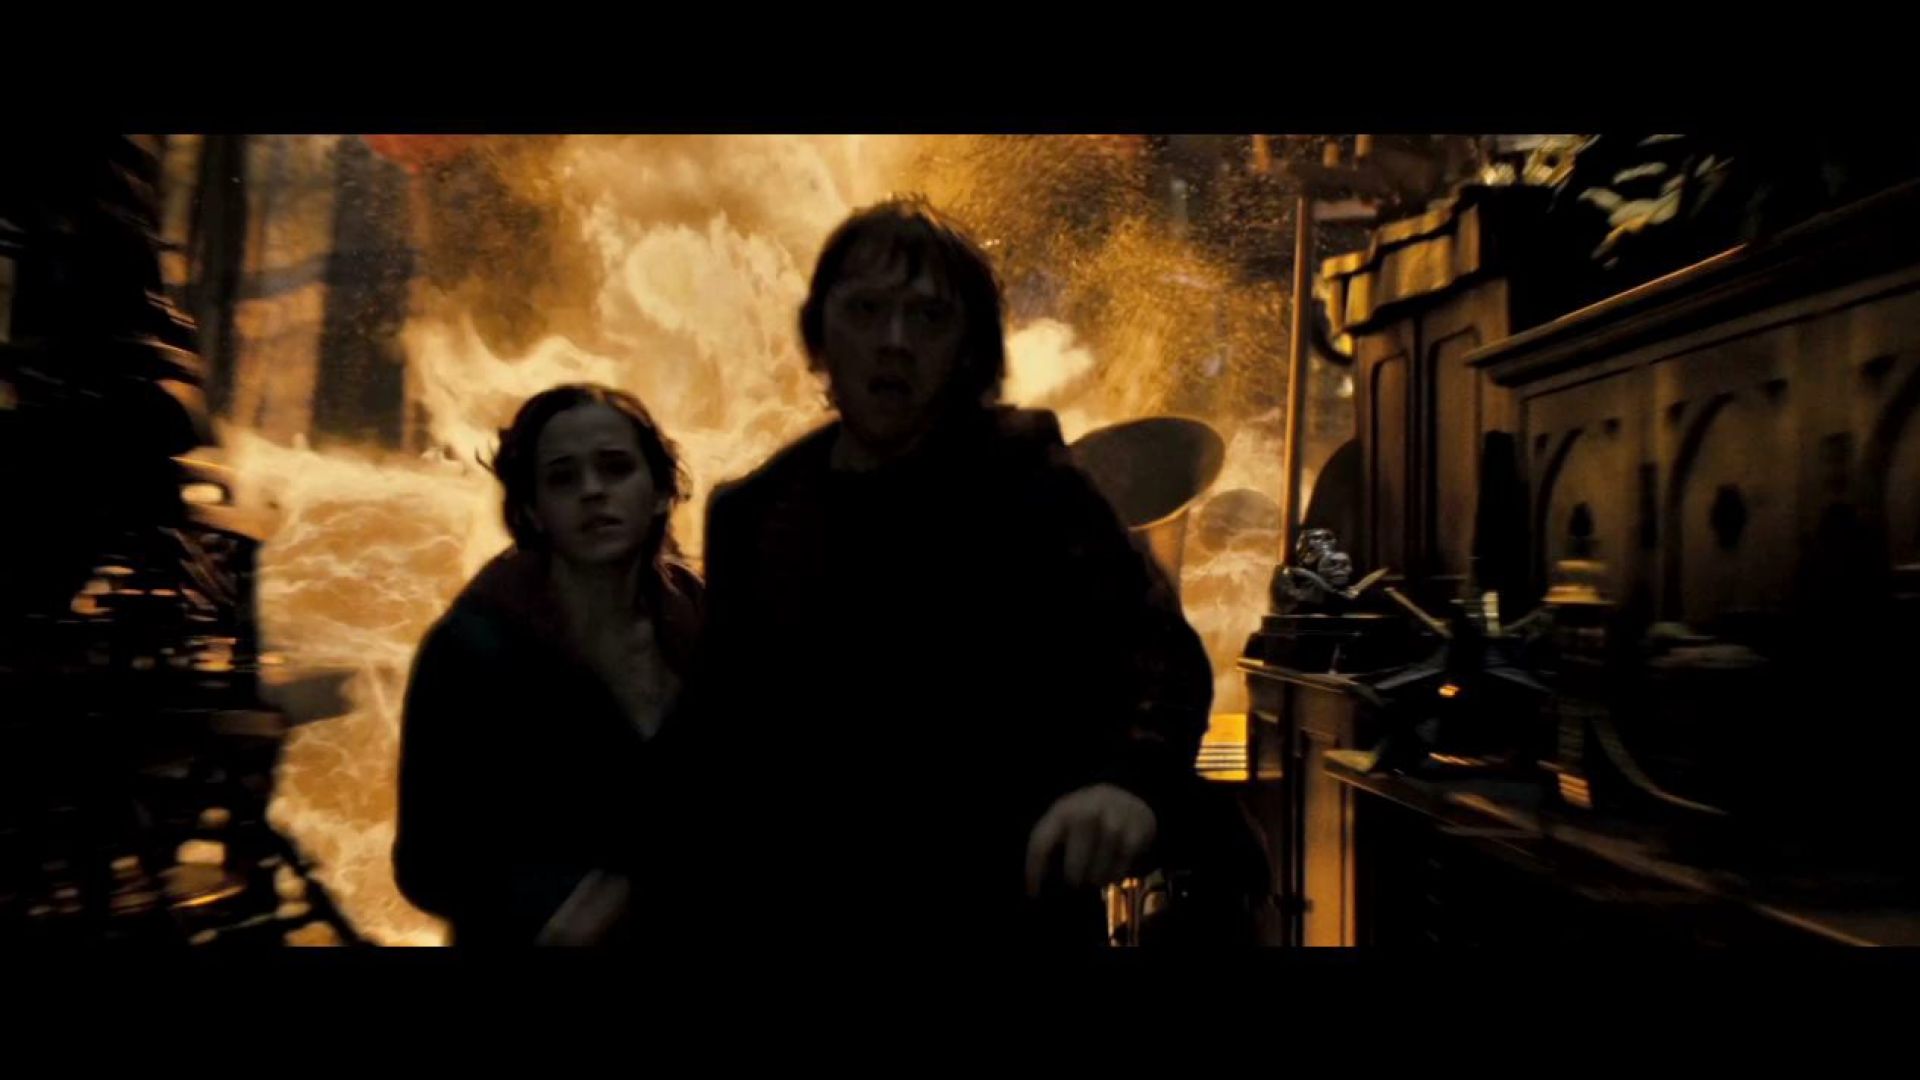 Harry, Hermione and Ron run from the fire in the Room of Requirement